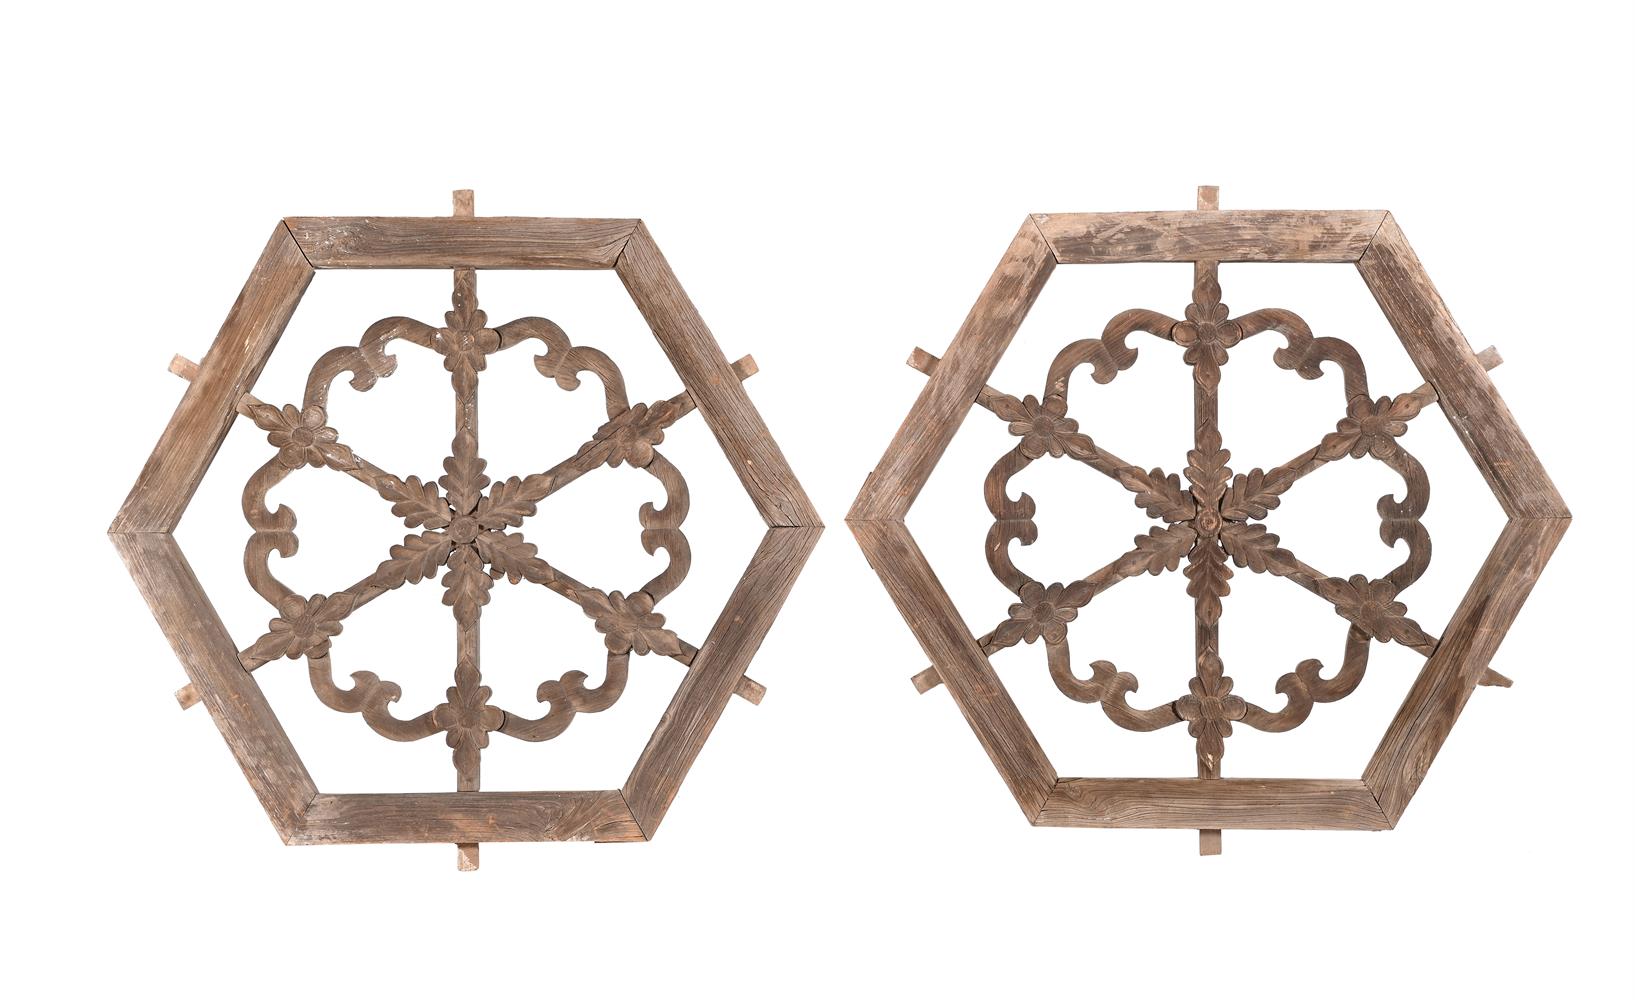 A LARGE PAIR OF SOUTHERN ELM HEXAGONAL WINDOWS, LATE MING OR QING DYNASTY - Image 4 of 4